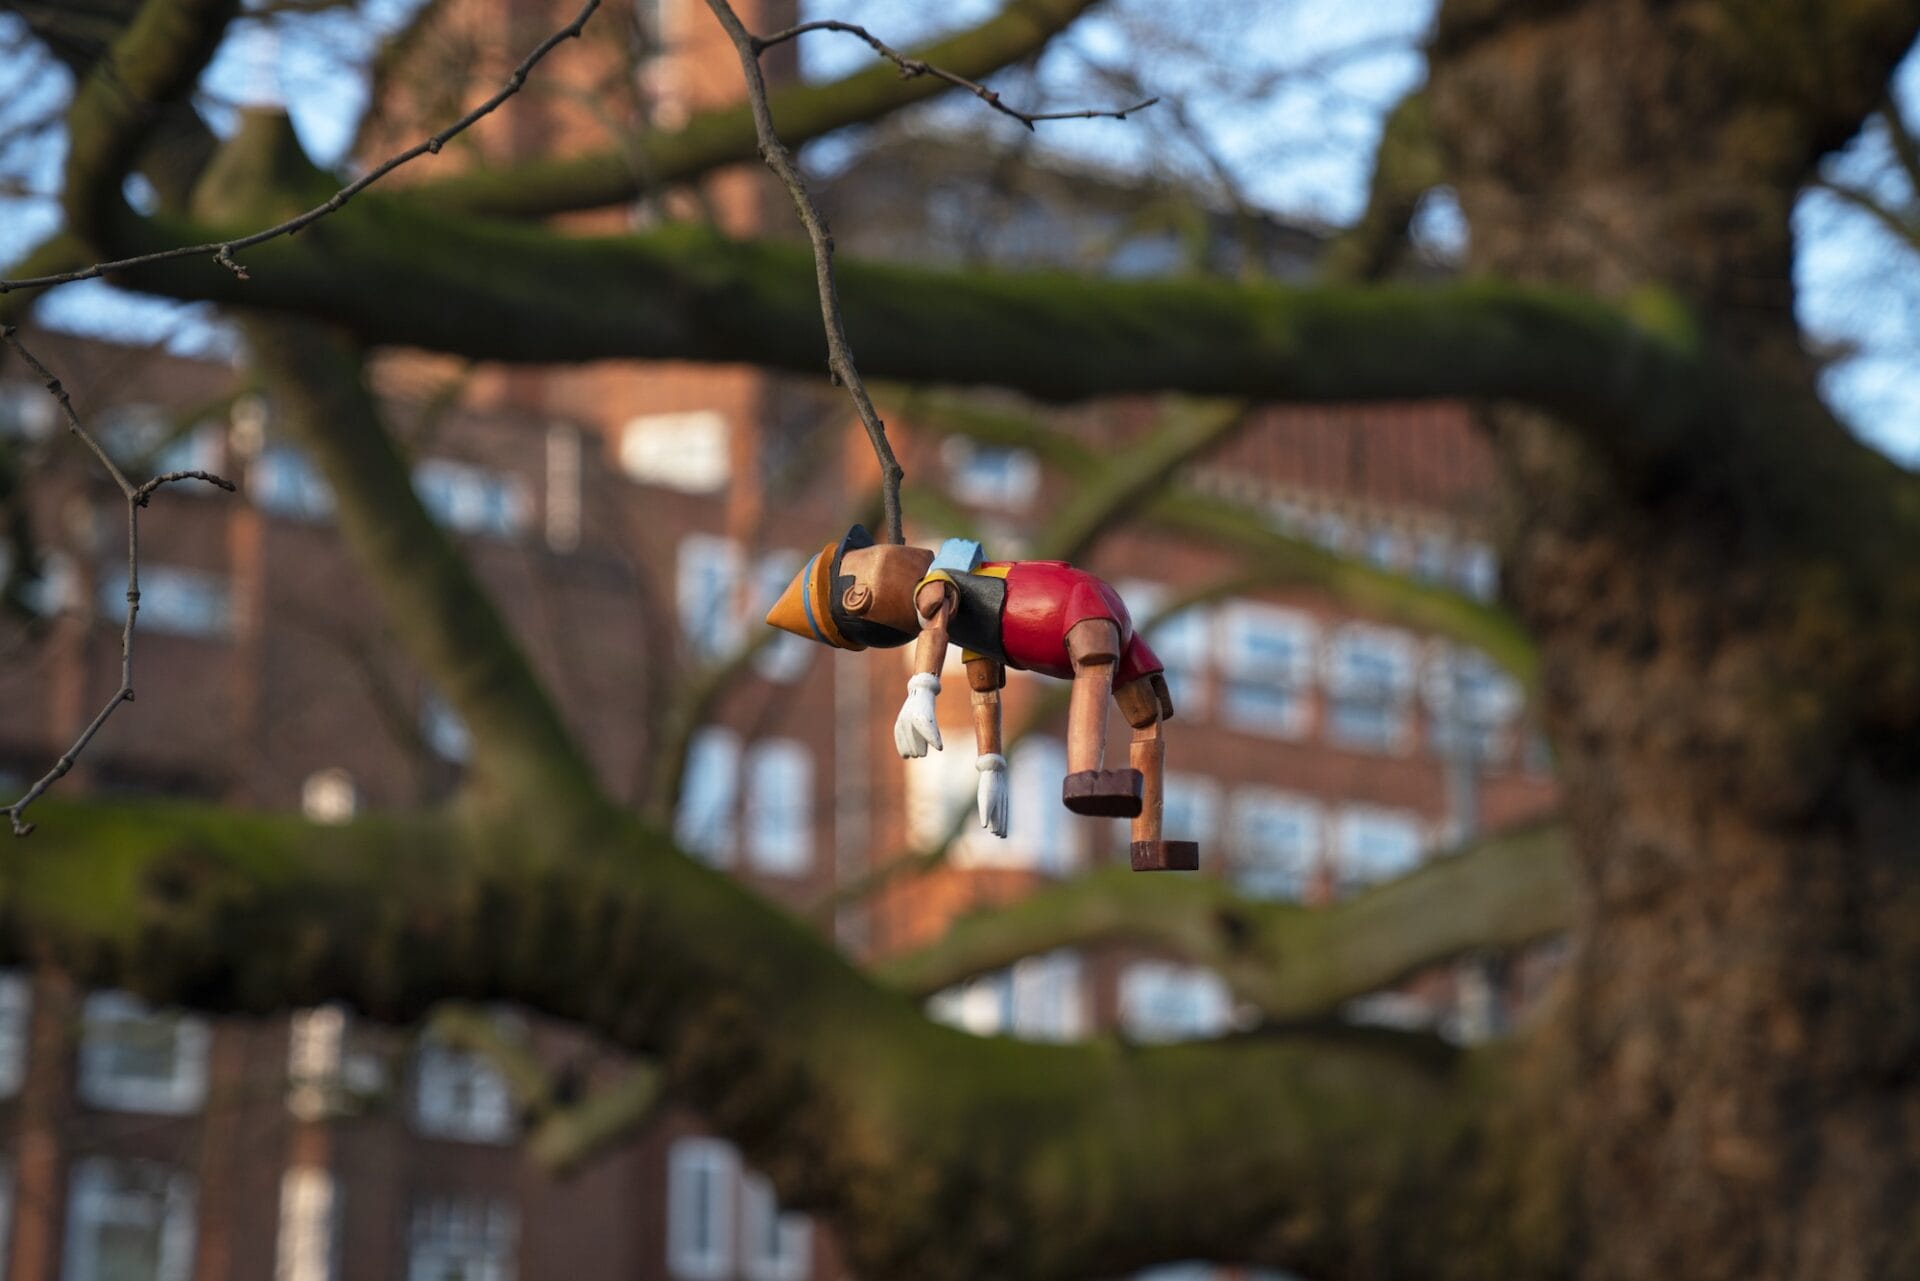 A wooden sculpture of Pinocchio hangs from a tree branch as if his nose has grown so long it is an entire tree.